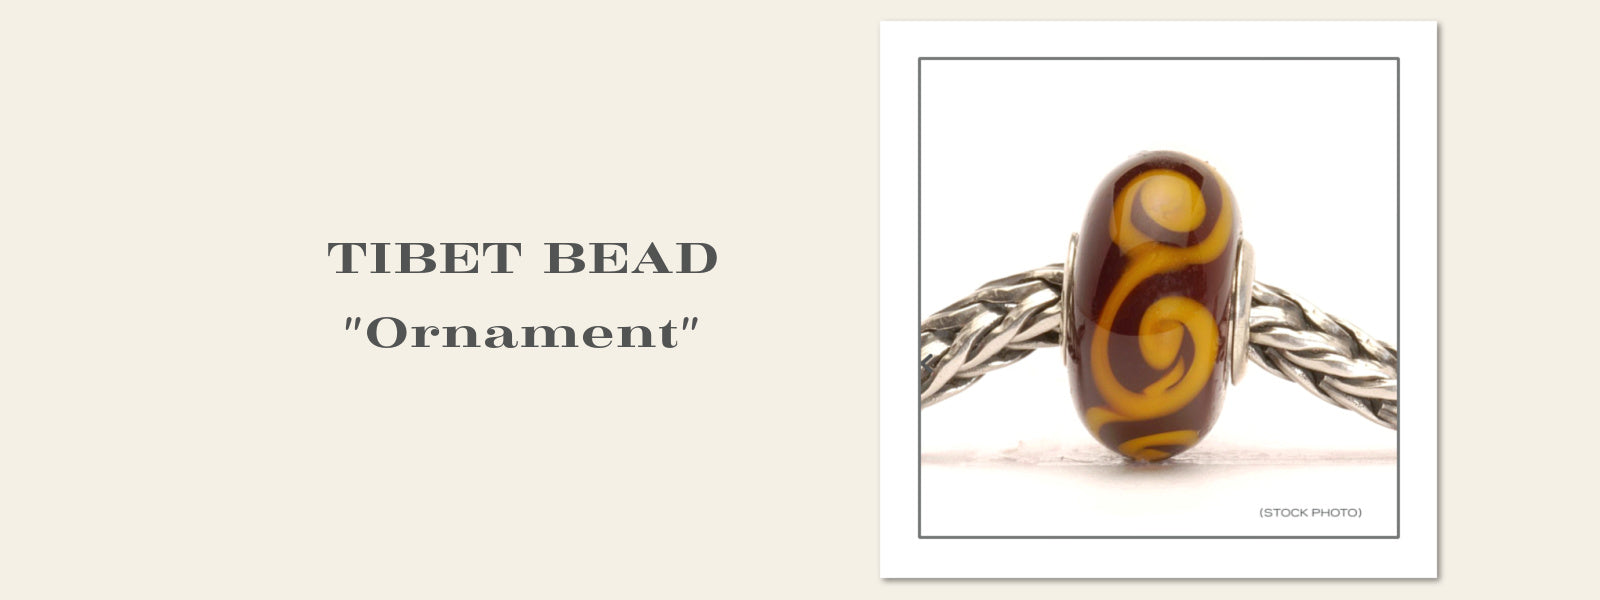 The  ORNAMENT bead is part of the rare Trollbeads Tibet Collection which is available at Suzie Q Studio.​​